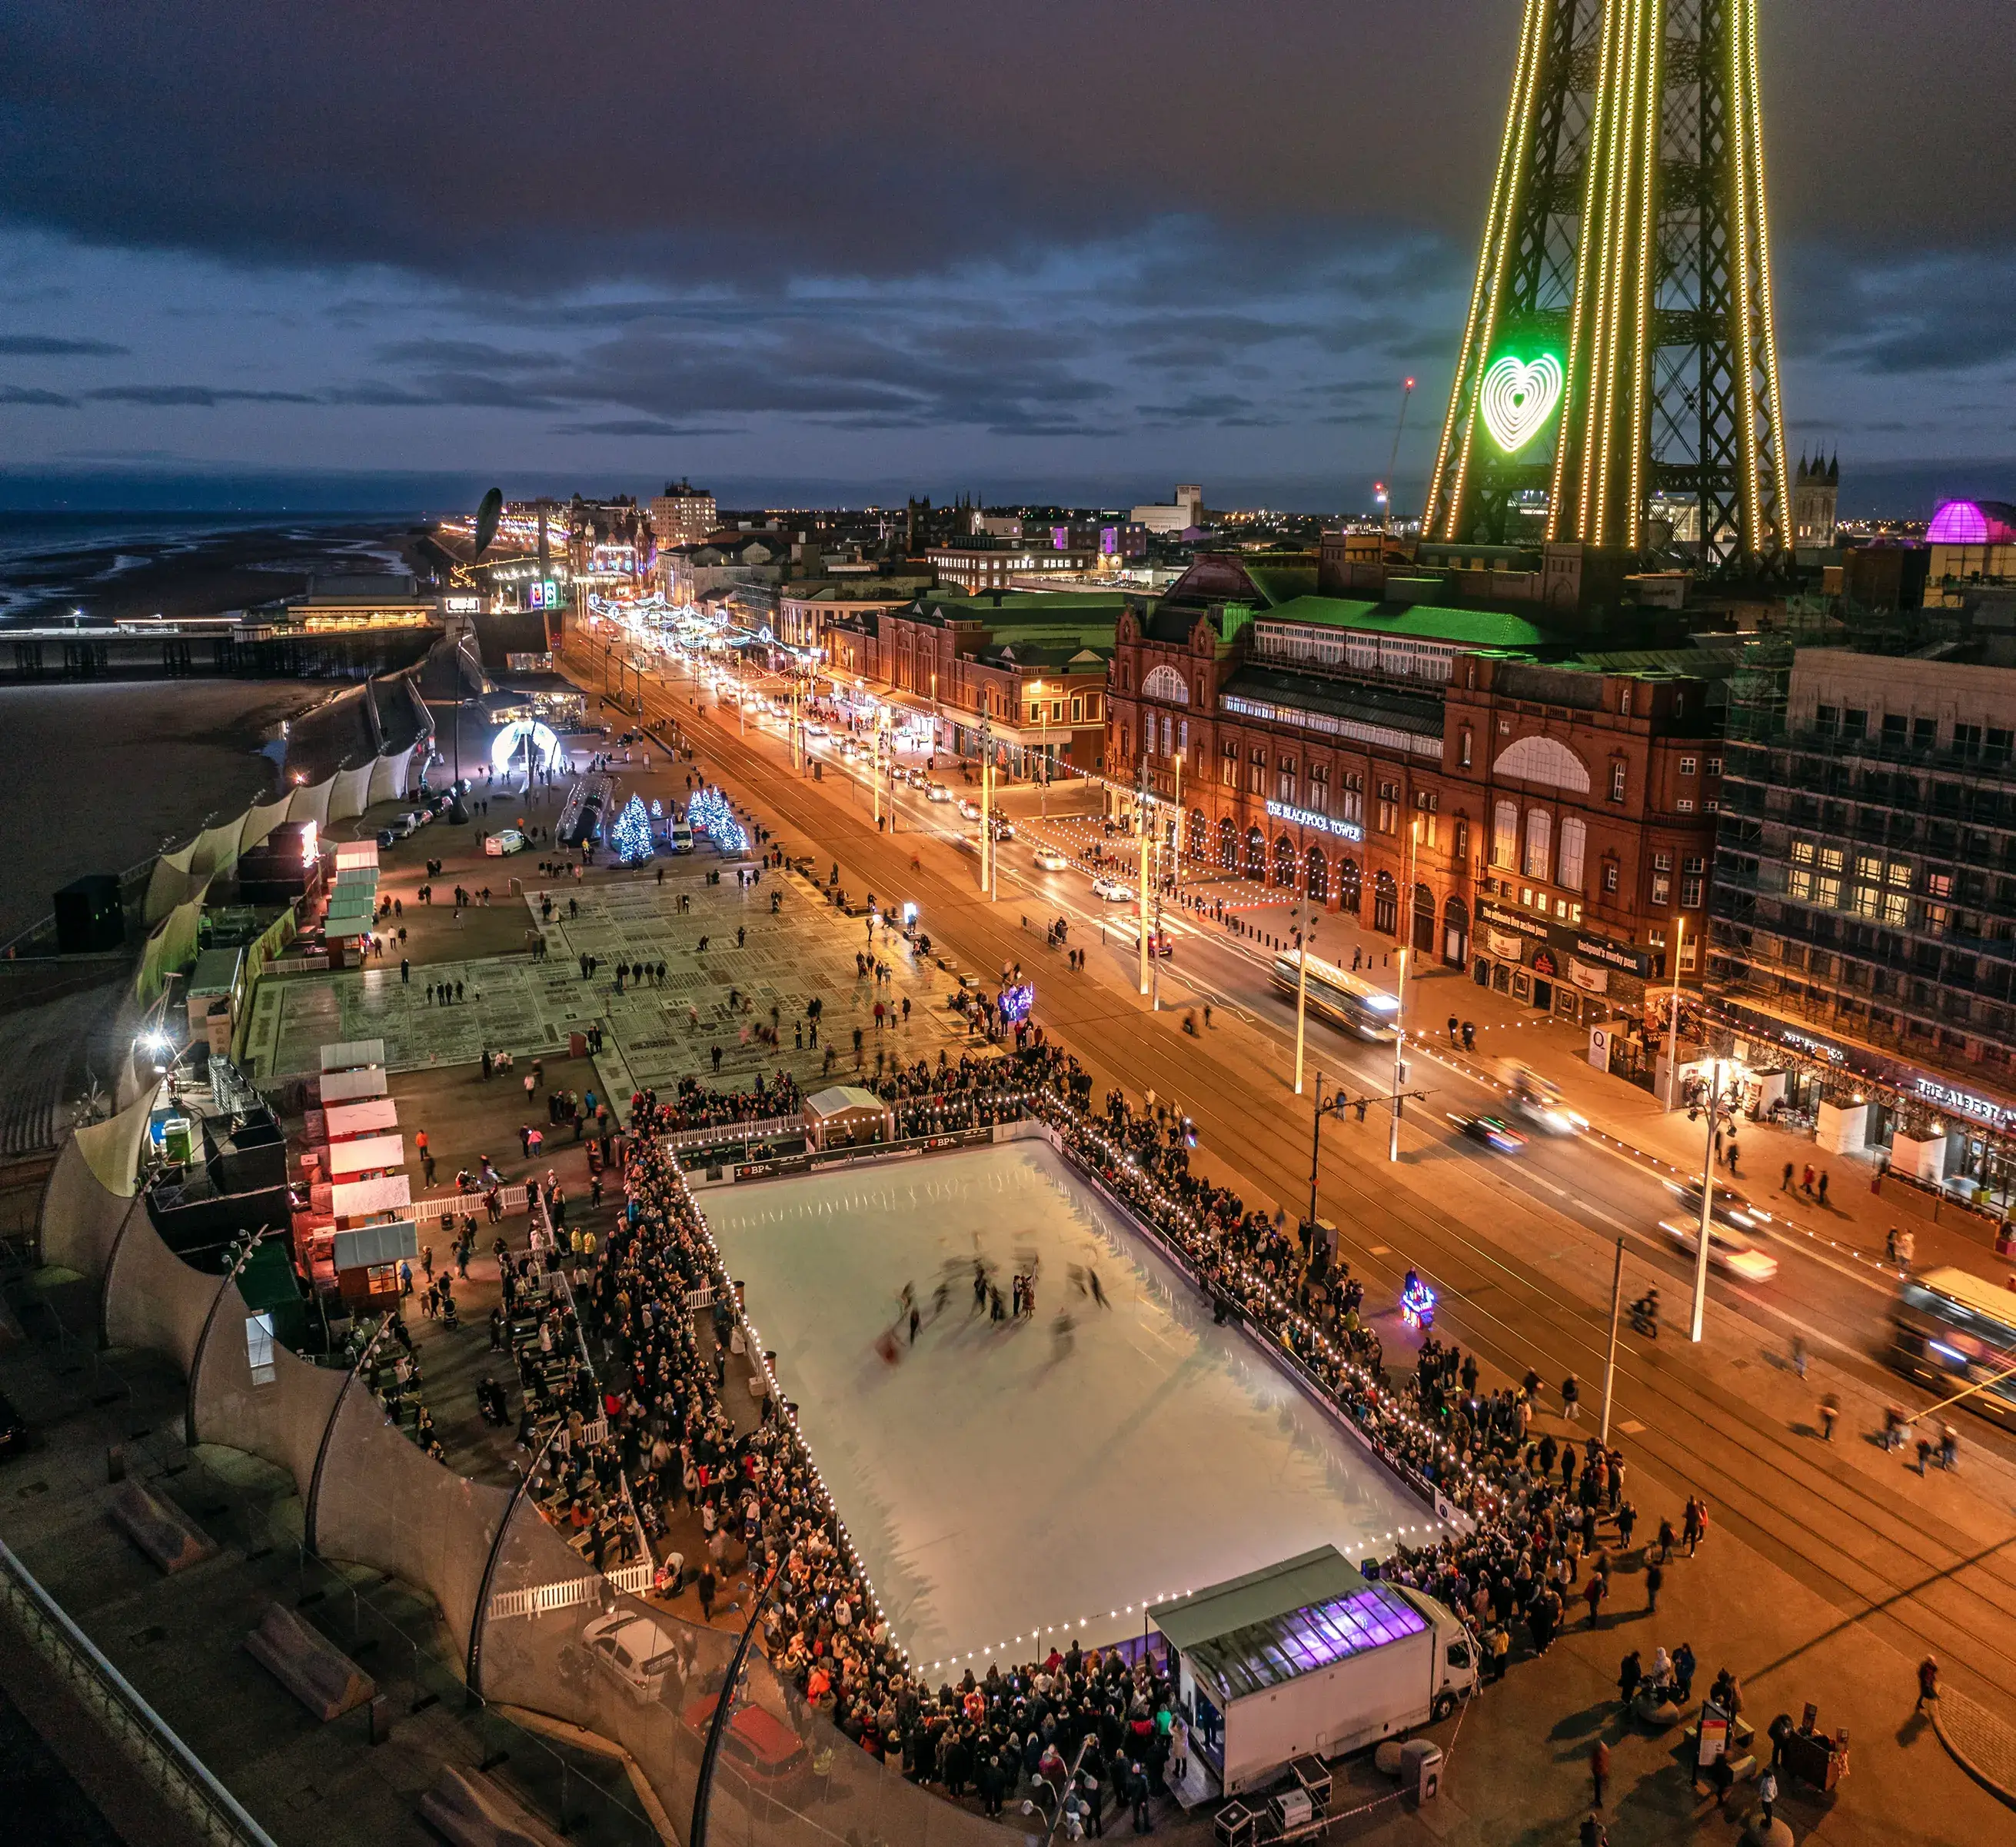 Blackpool Tower and ice rink